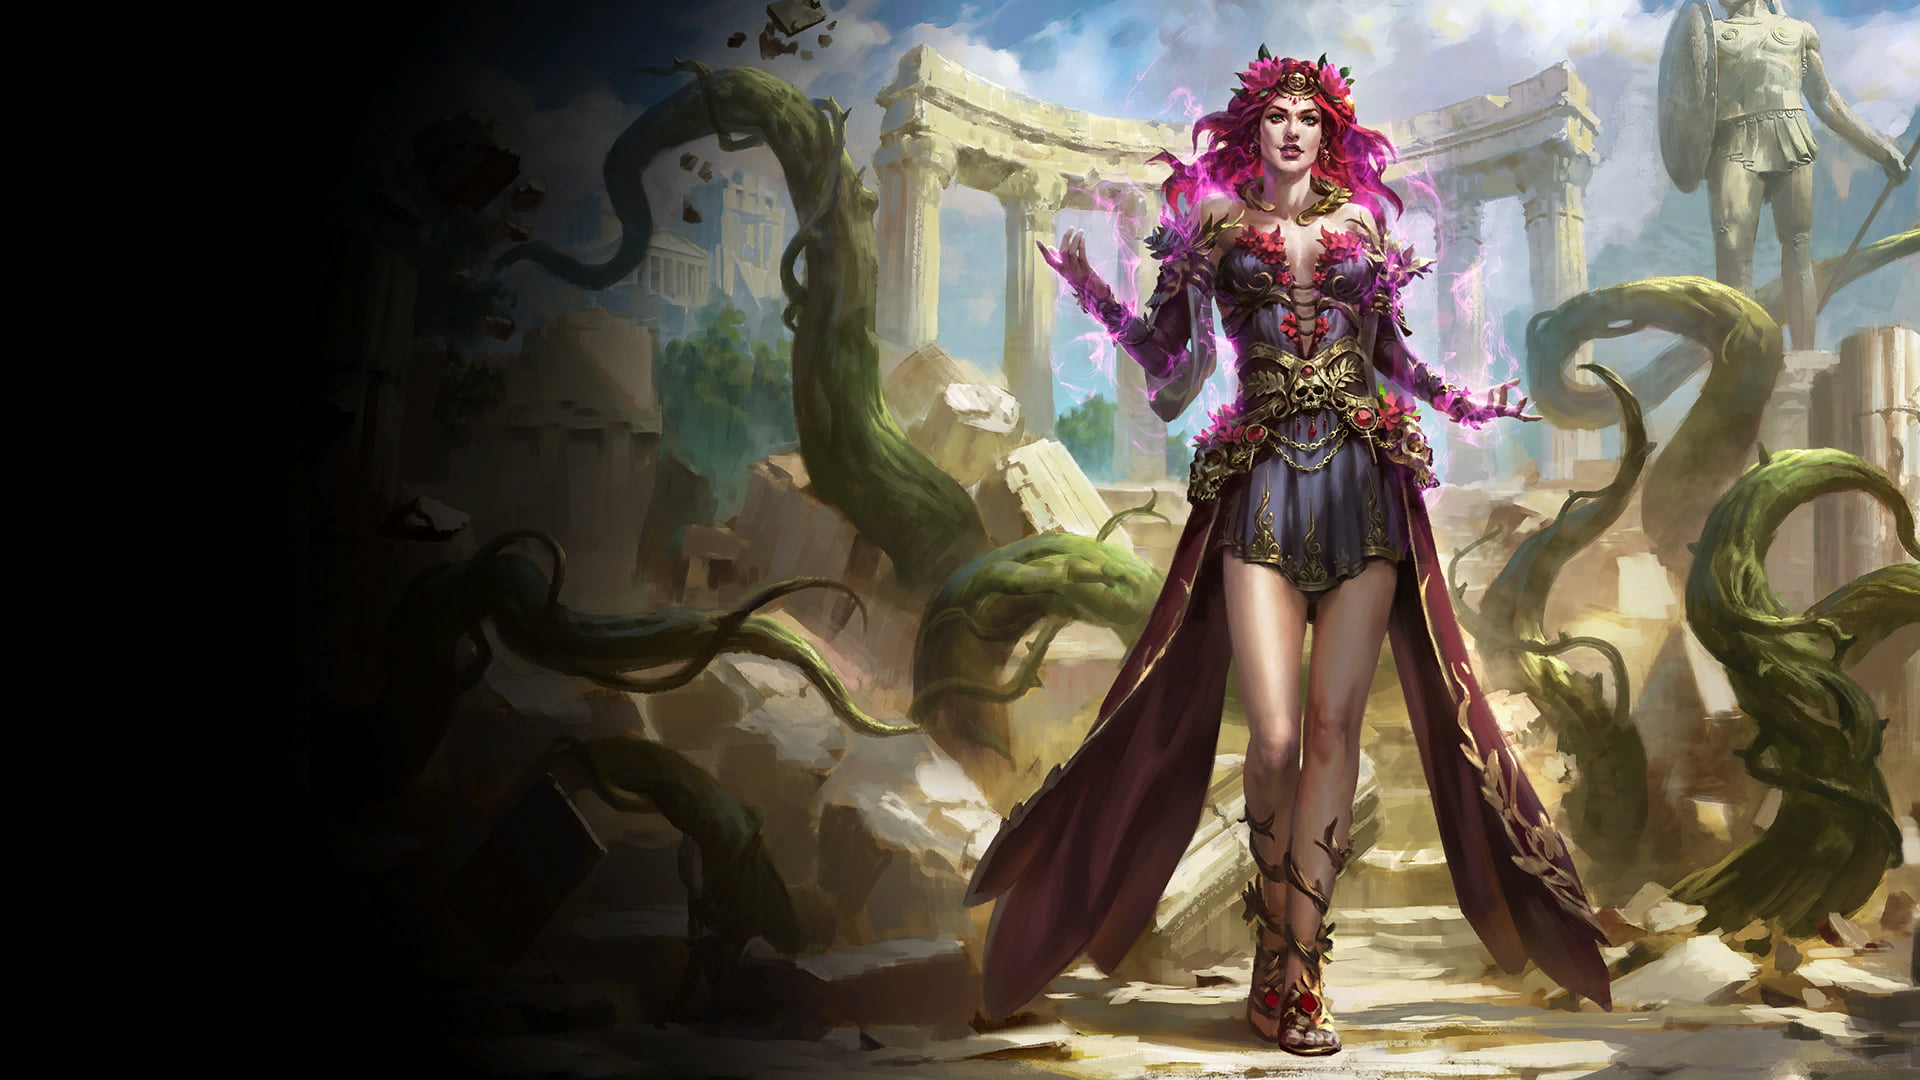 The deadliest of gardeners, Persephone waters her plants with YOU!